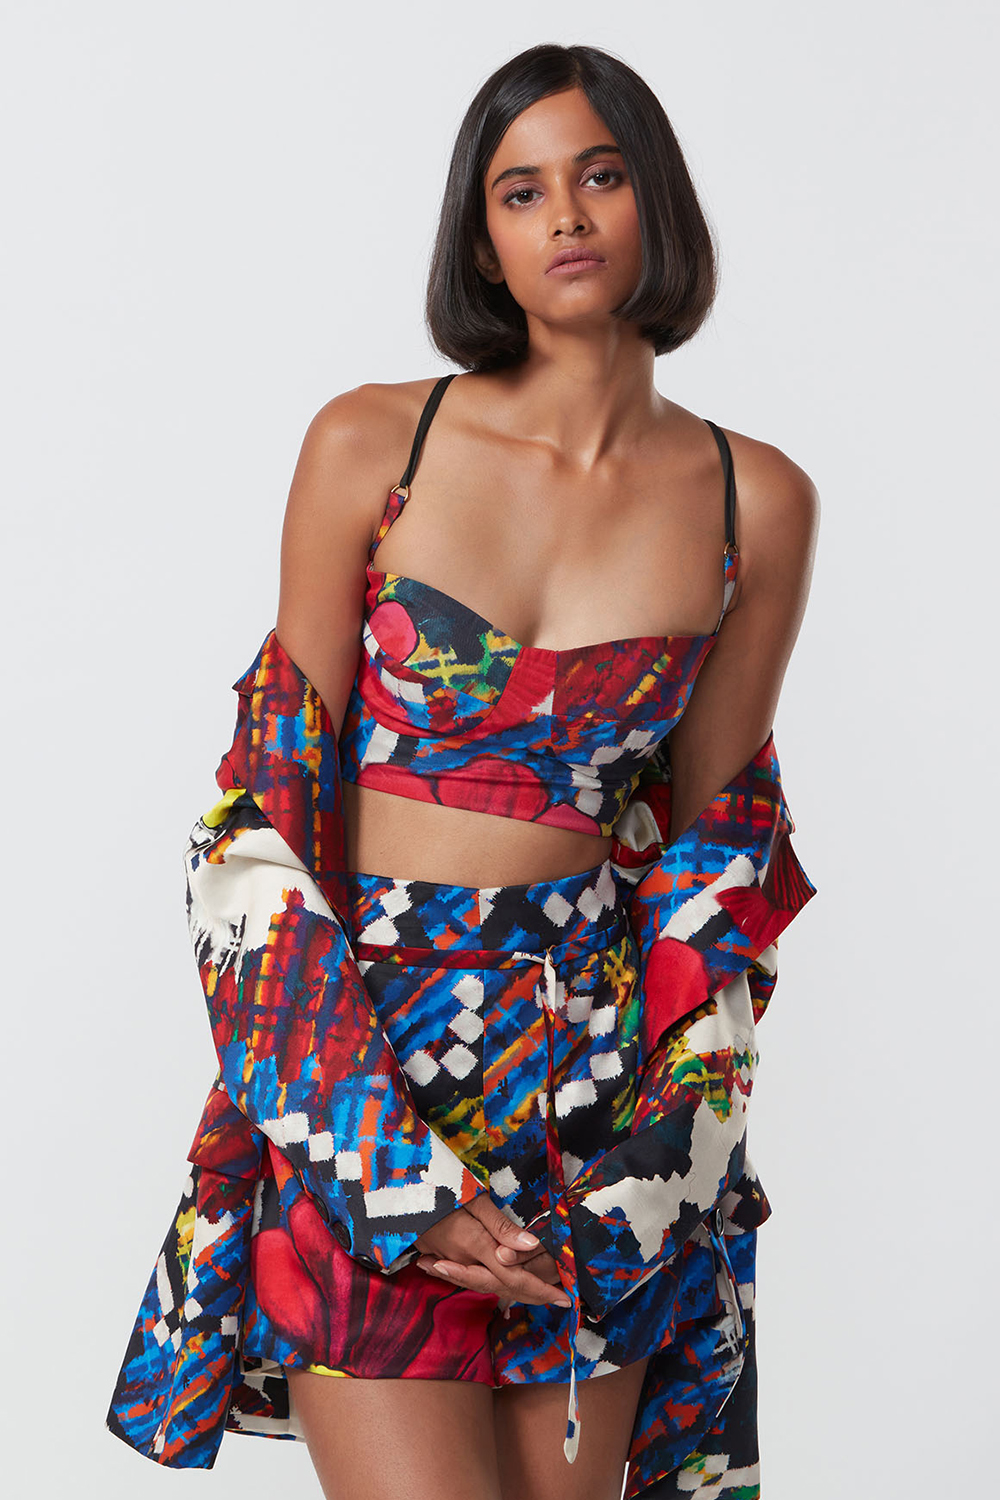 Abstract Floral Print Bustier With Adjustable Straps